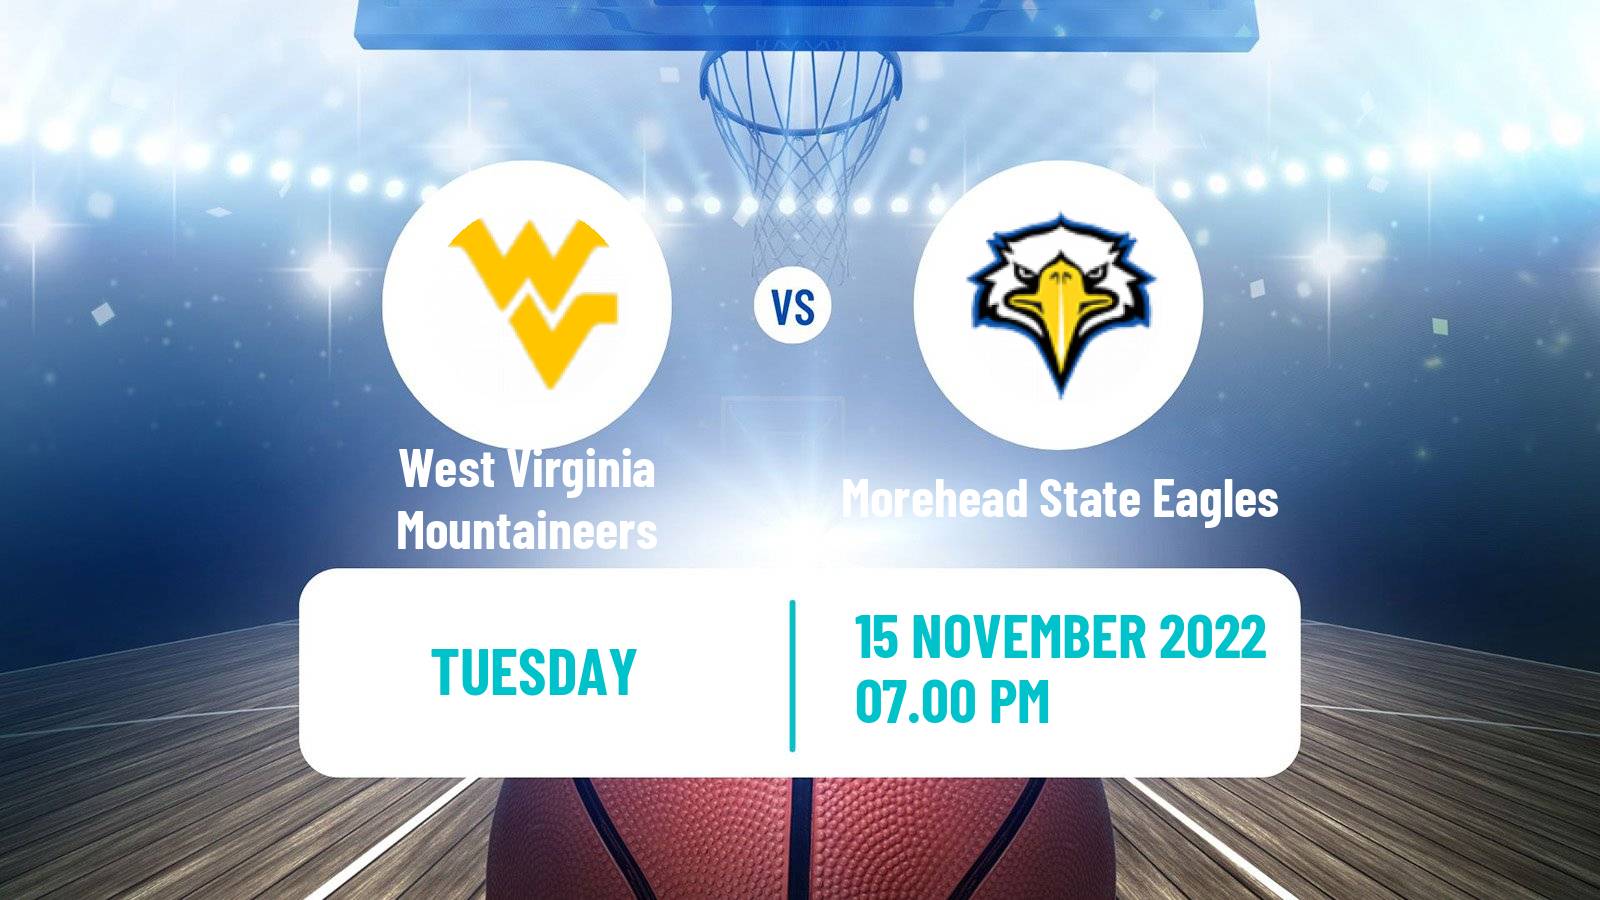 Basketball NCAA College Basketball West Virginia Mountaineers - Morehead State Eagles